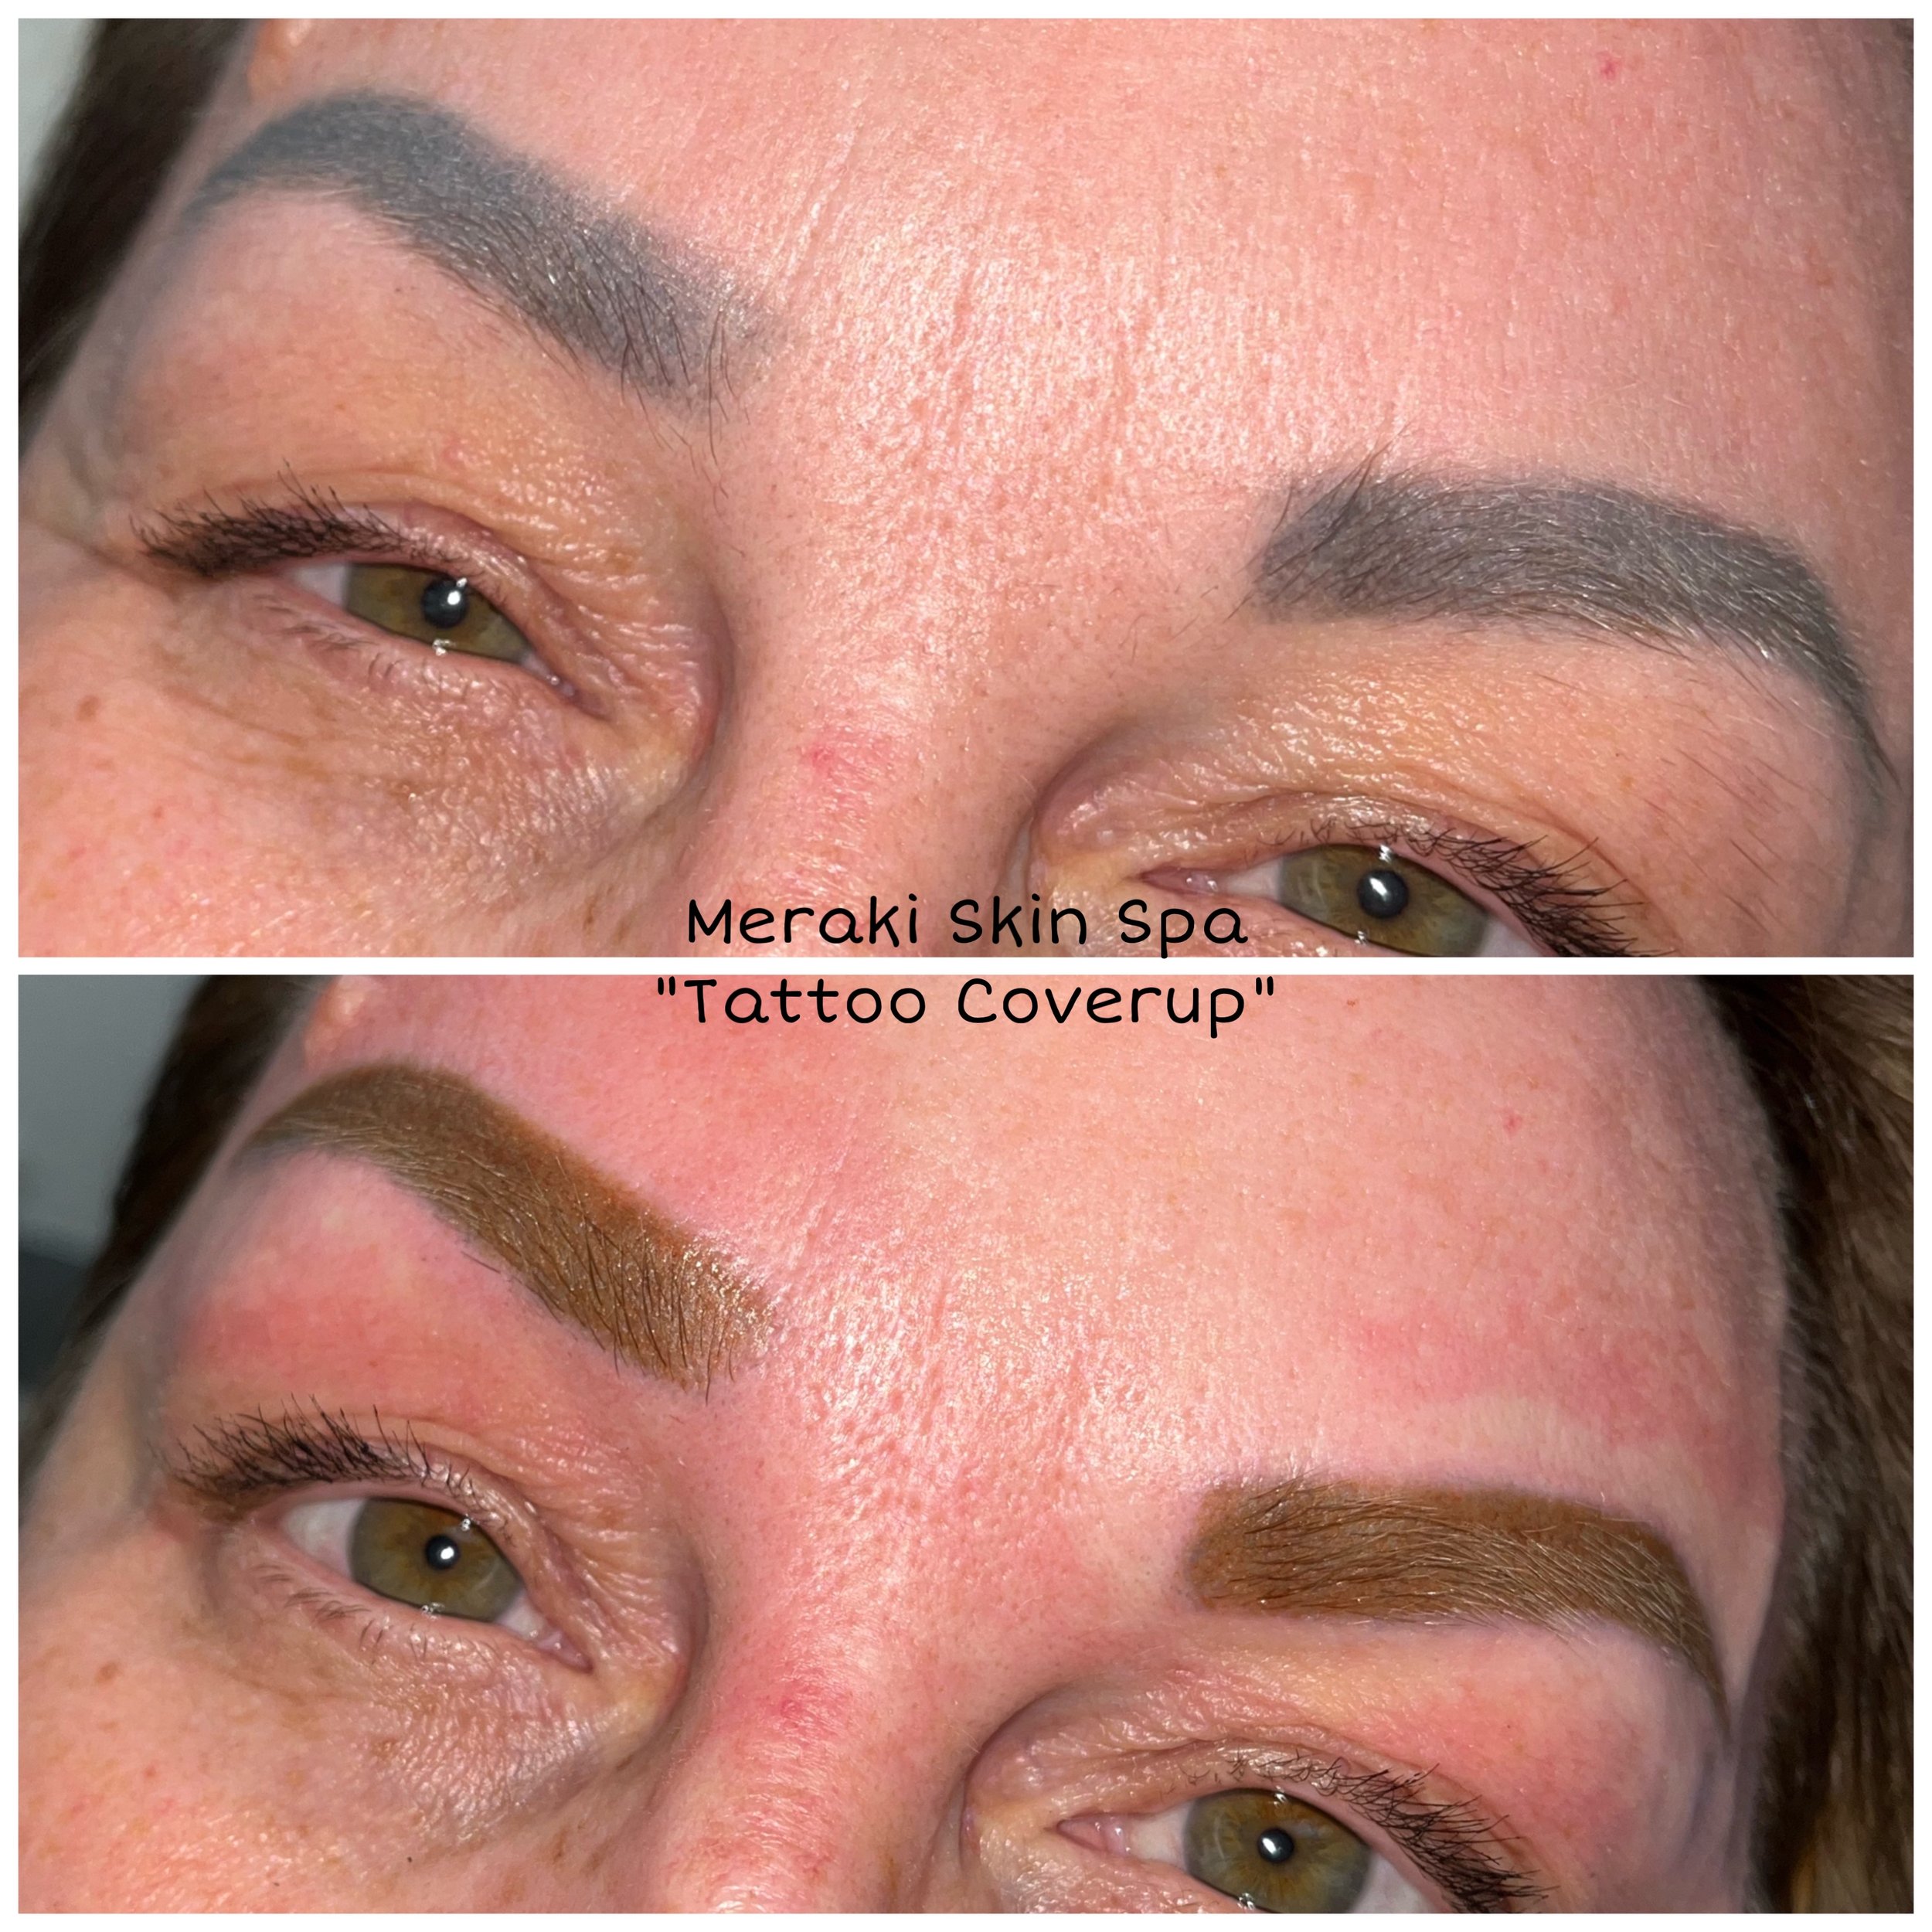 How to remove microblading eyebrows? How to fix a failed microblading